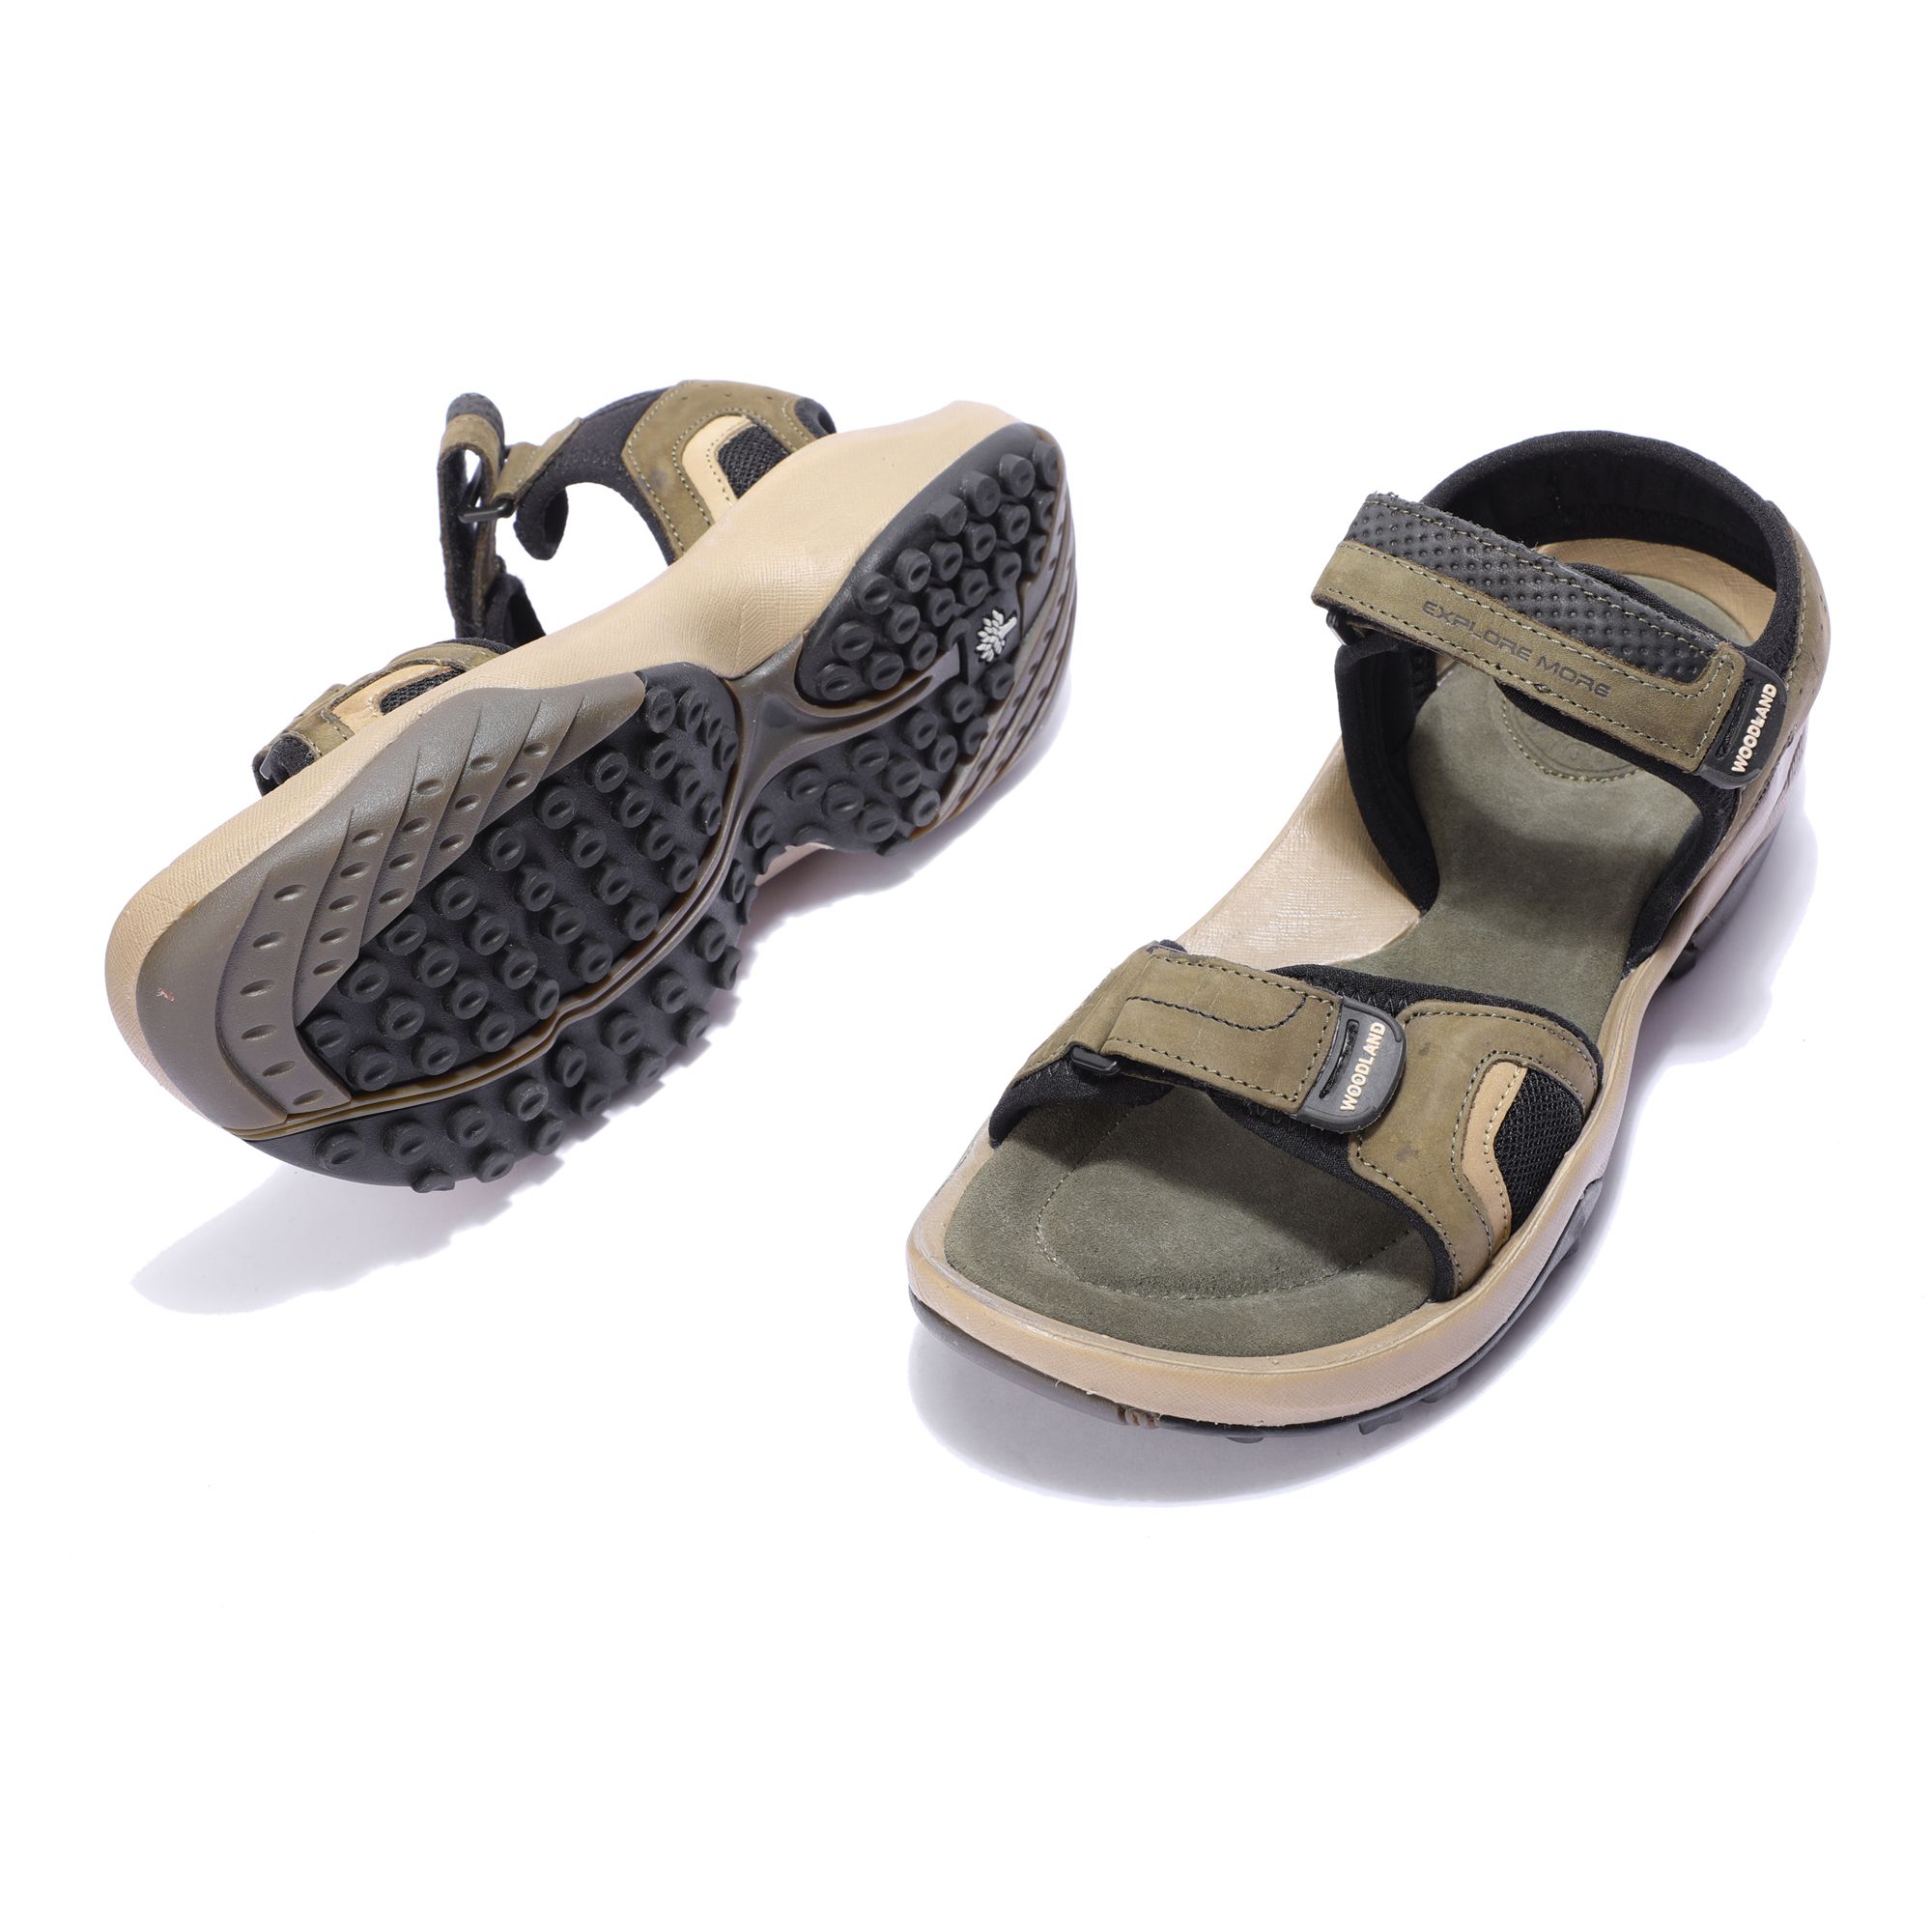 Woodland Sandal And Shoes - Buy Woodland Sandal And Shoes online in India-sgquangbinhtourist.com.vn